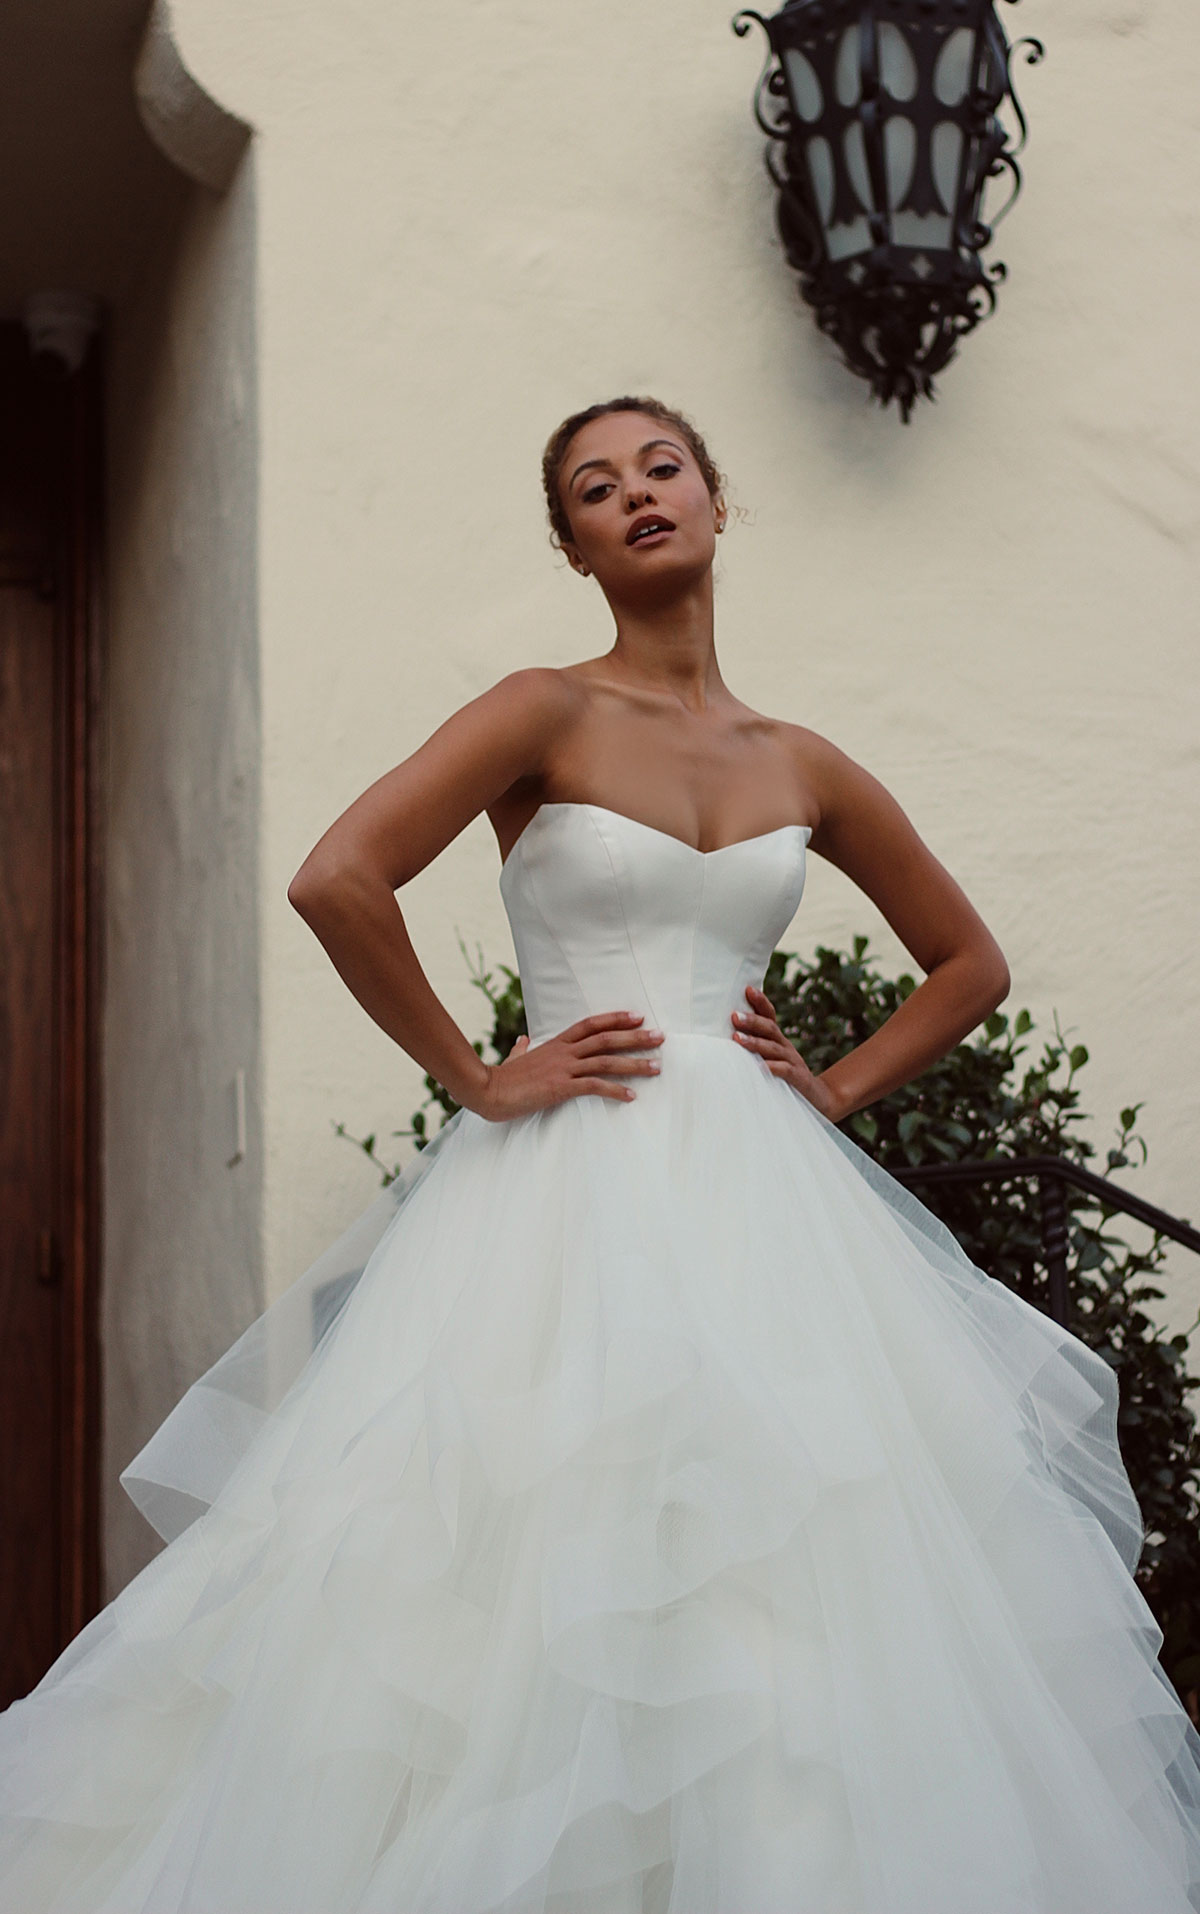 Strapless Sweetheart Neckline Ball Gown Wedding Dress With Organza And  Tulle Details